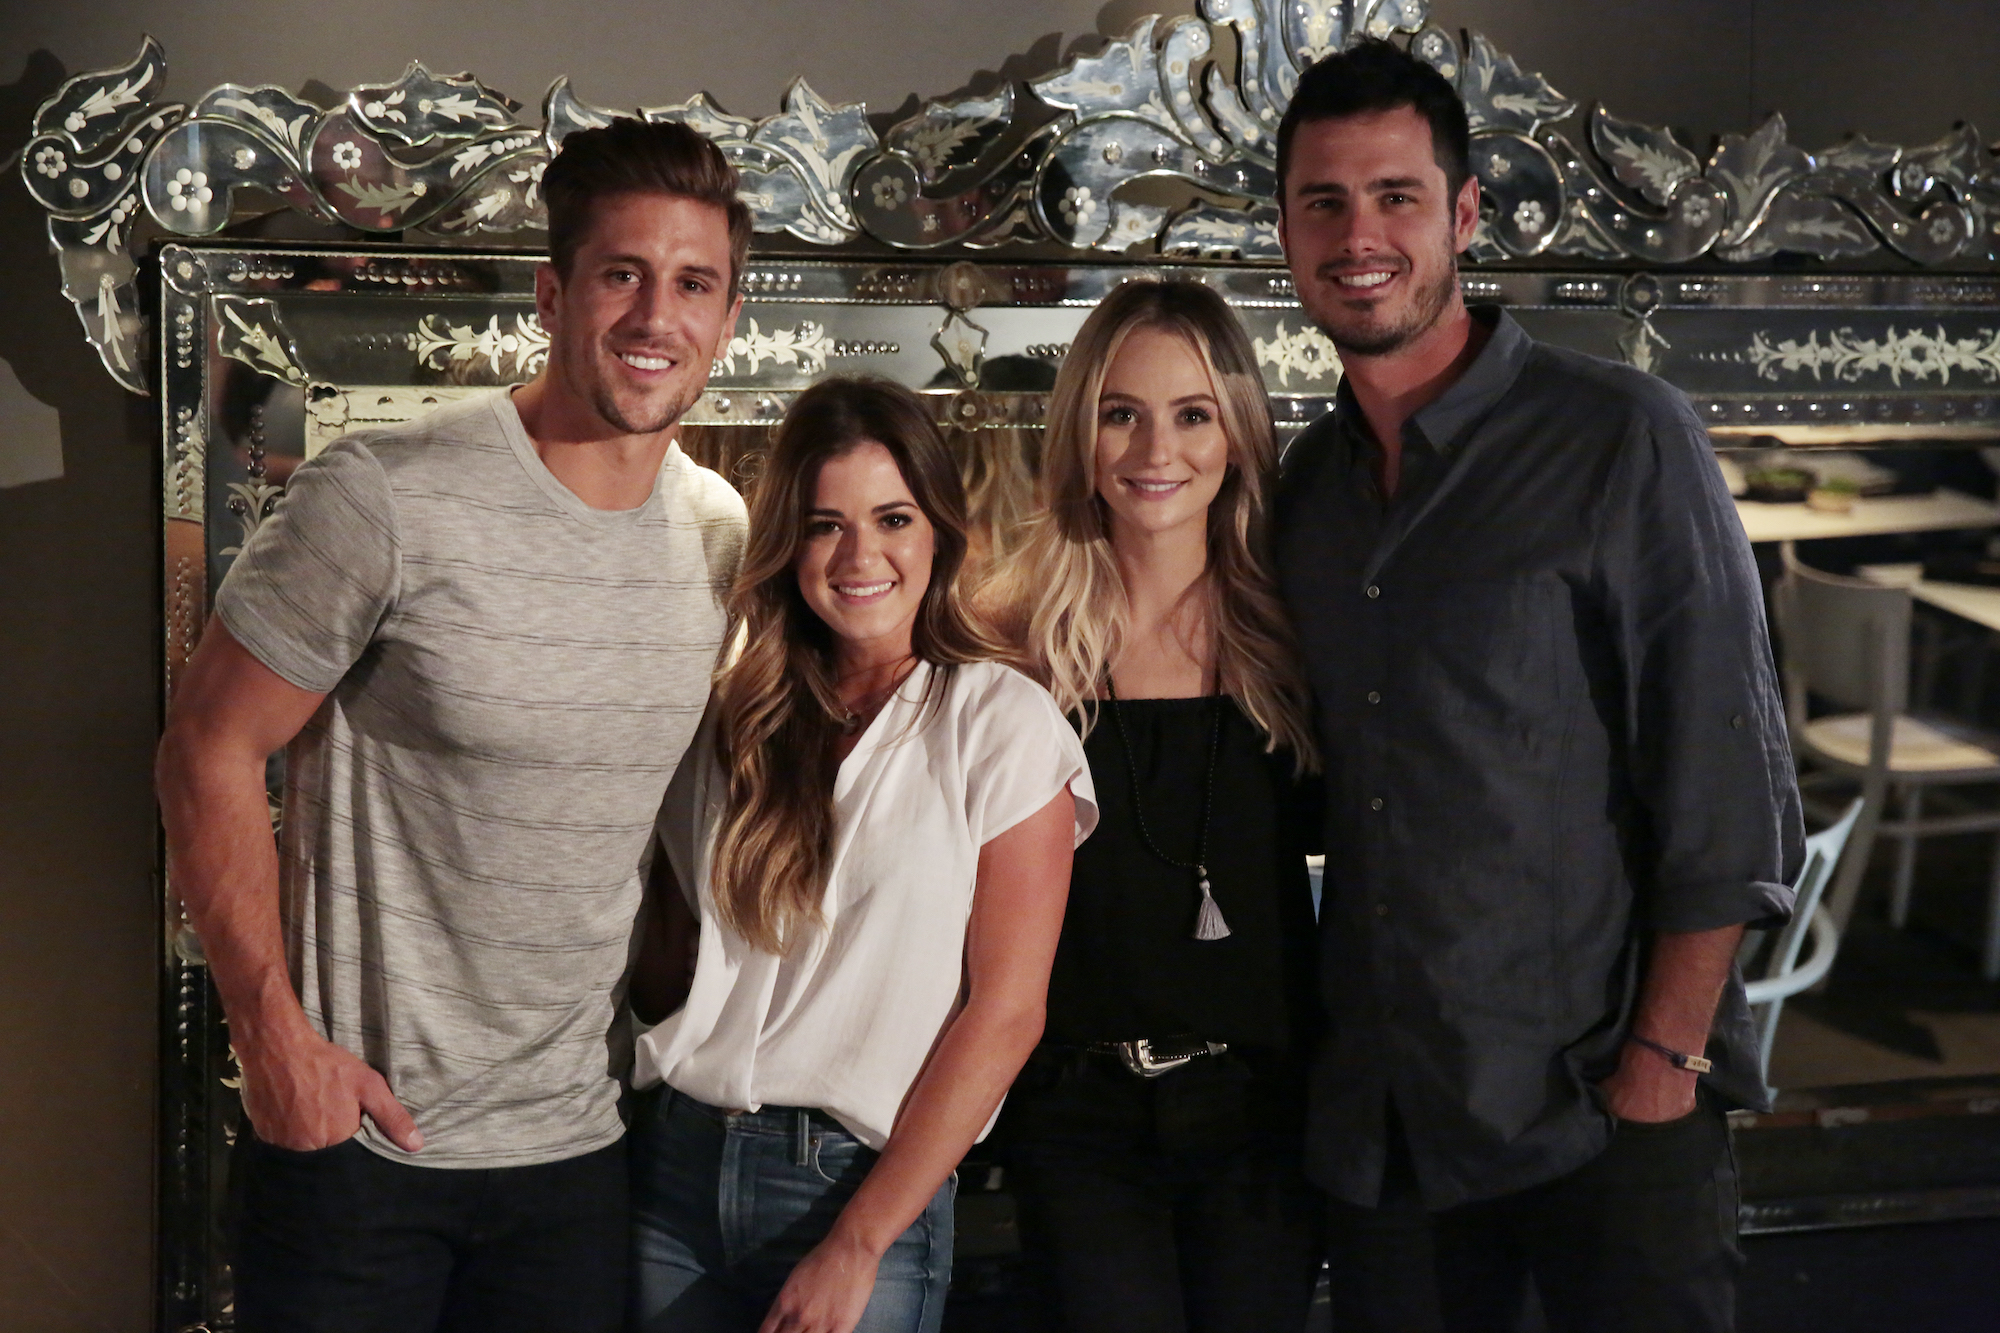 Ben Higgins made fans question is the bachelor not allowed to say 'I love you' after telling both JoJo Fletcher (Center Left) and Lauren Bushnell (Center Right) on his season of 'The Bachelor'